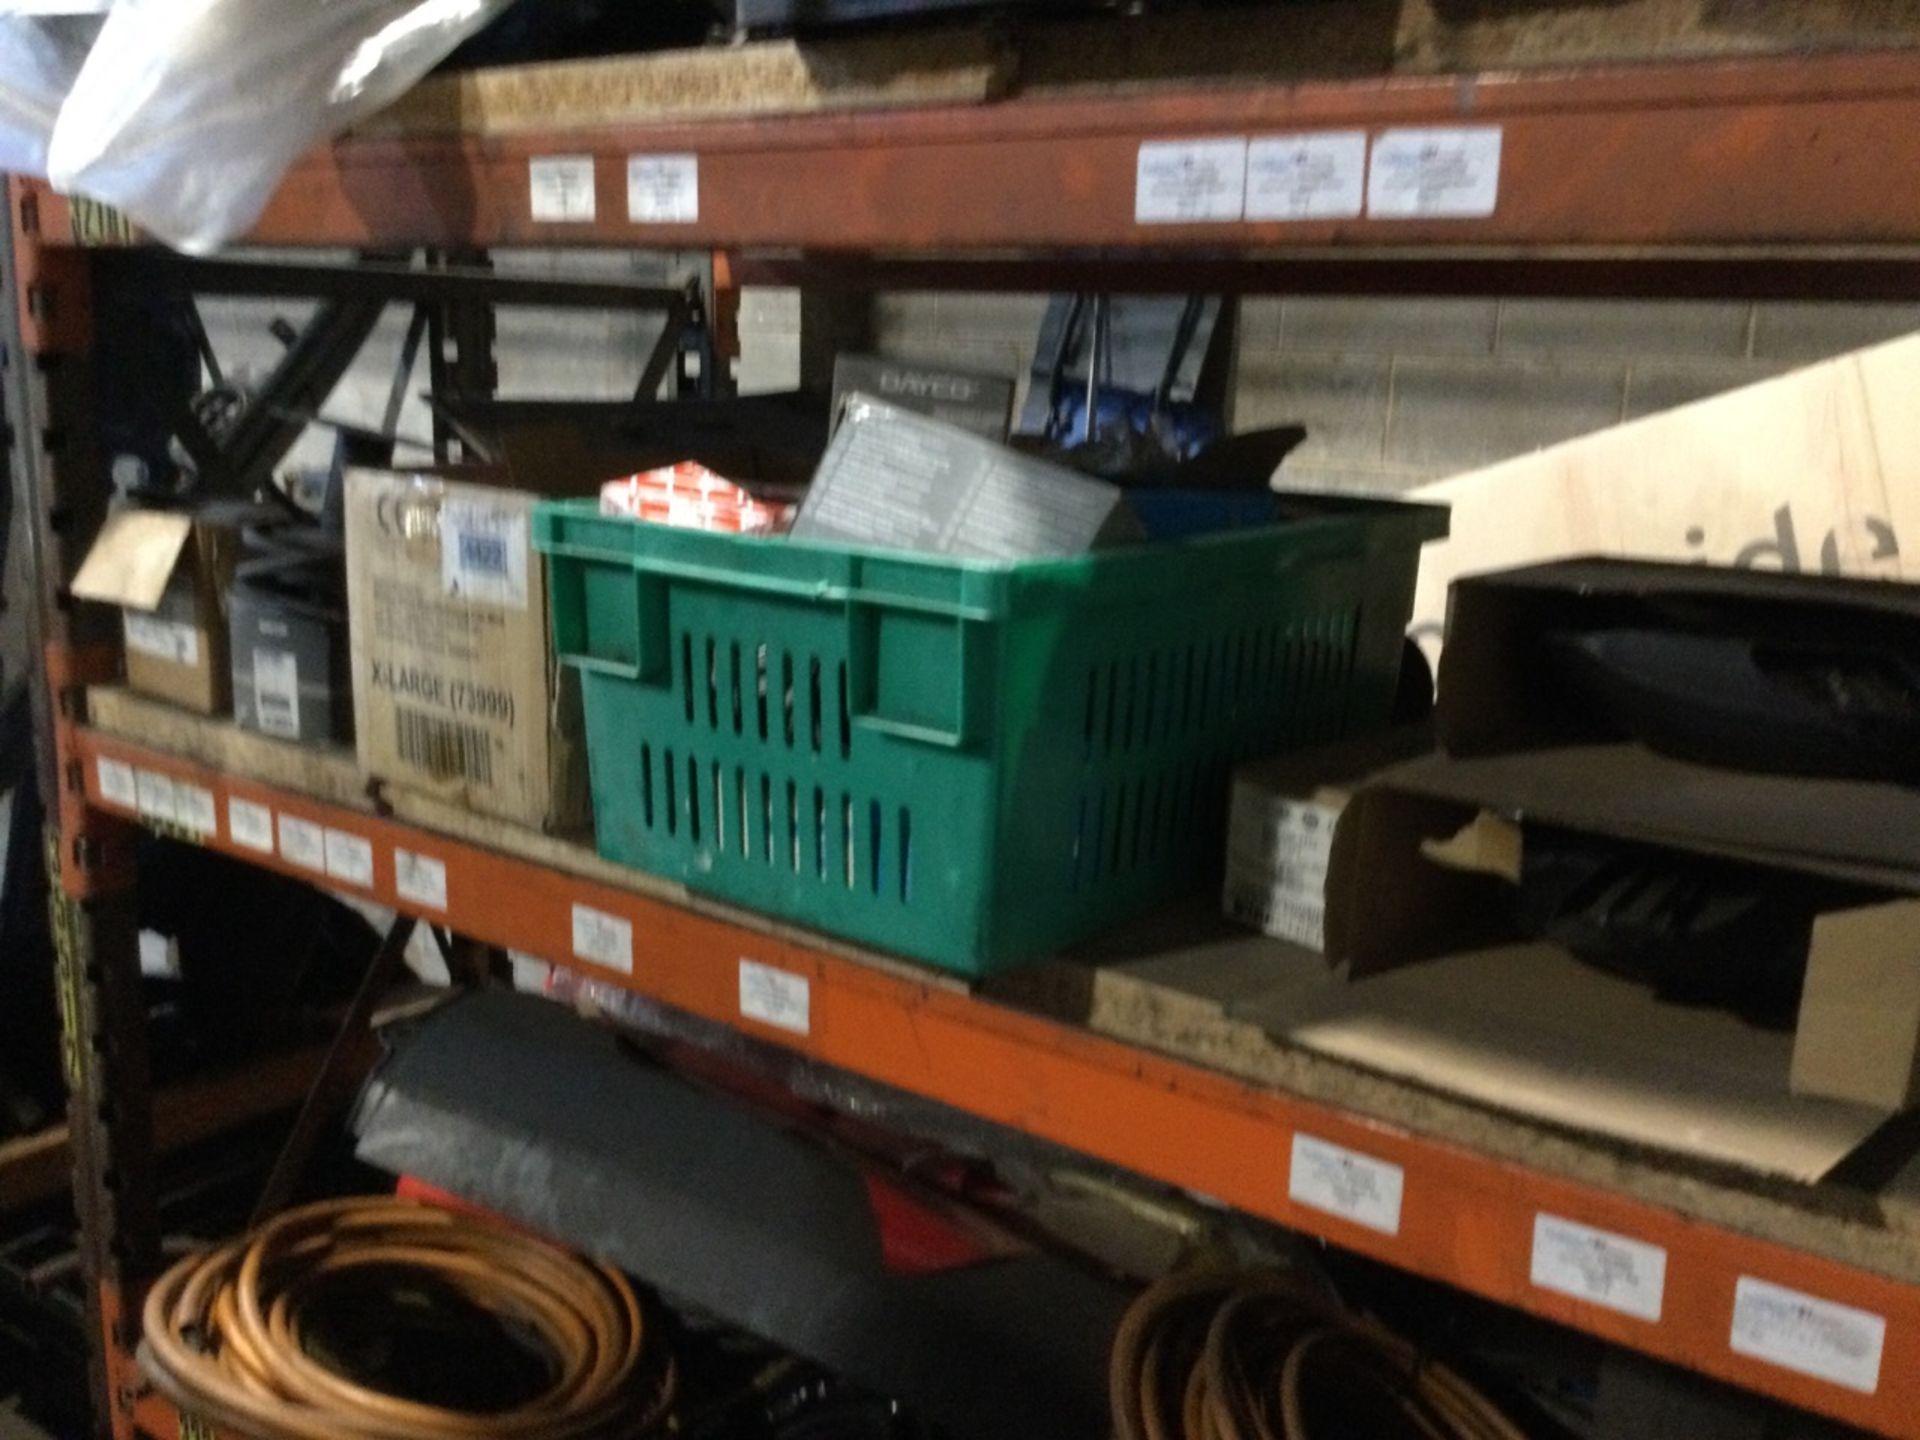 Complete Contents Of Mezzanine Floor Containing Parts, Inventory, Shelving Units Etc. - Image 7 of 9